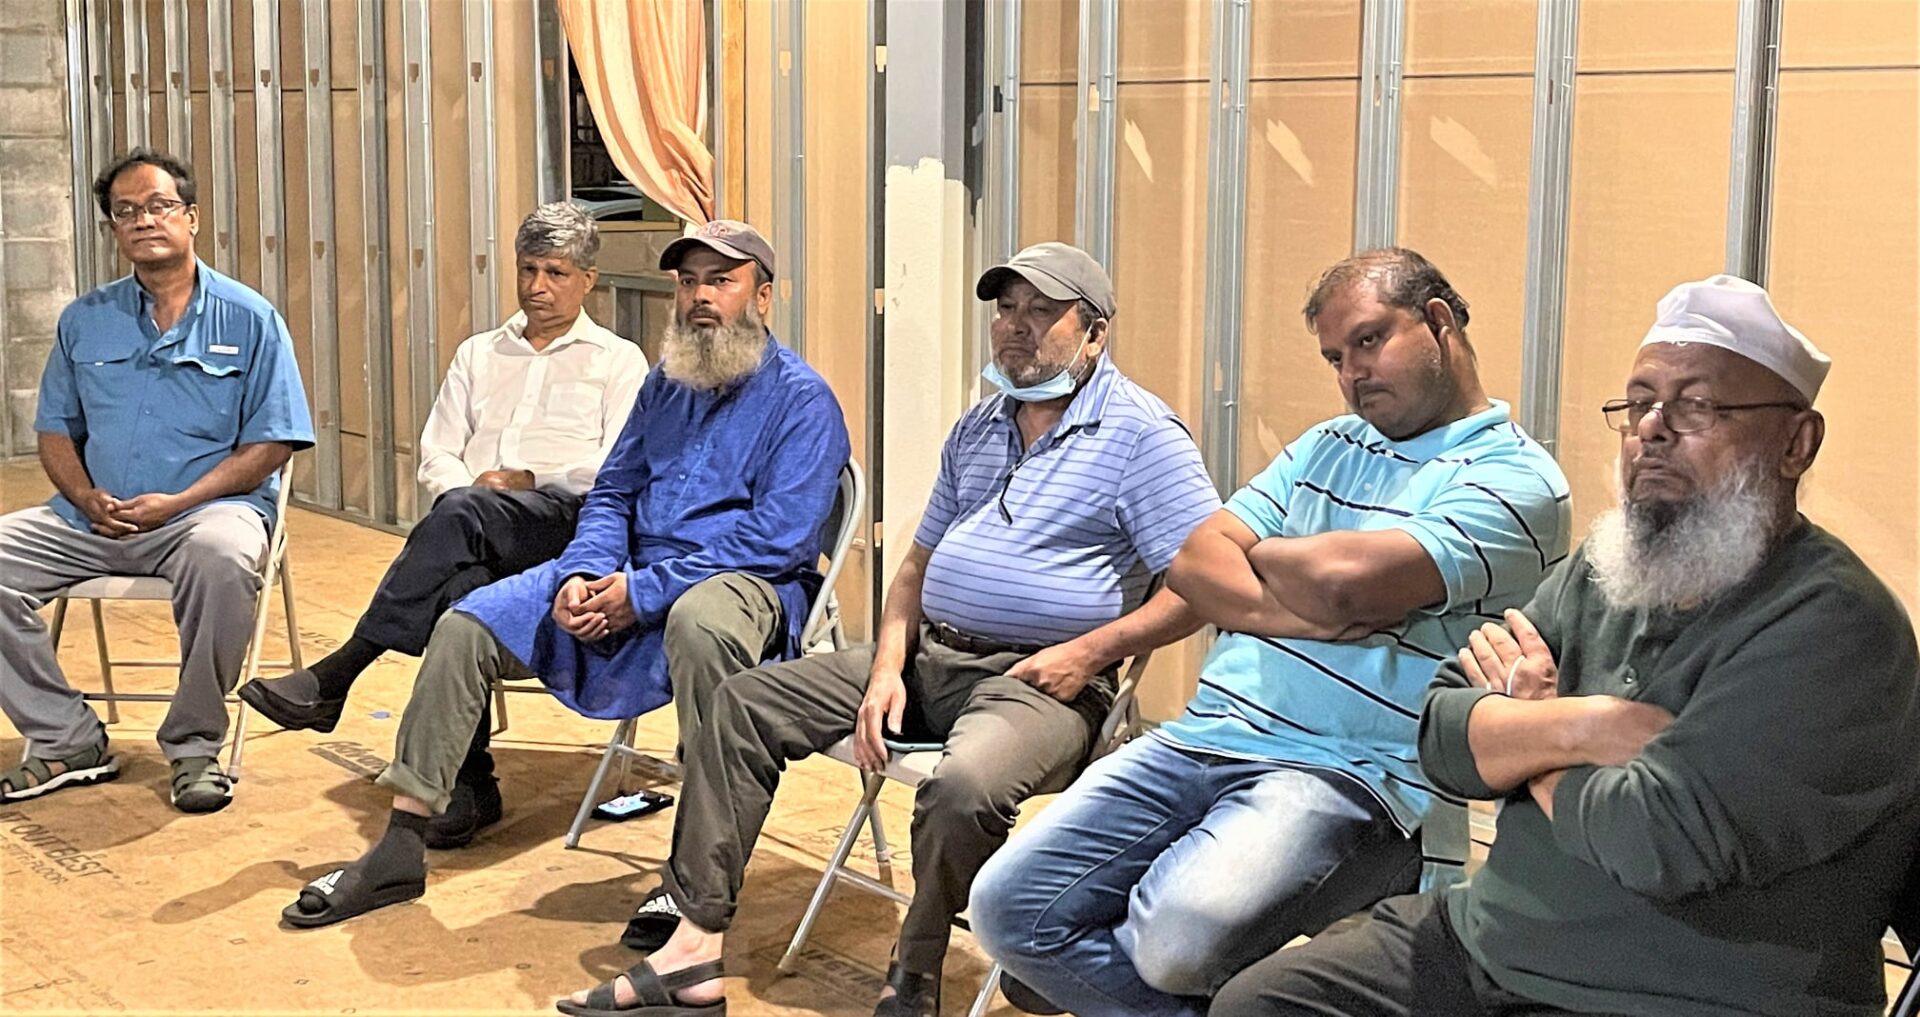 Six men sitting on foldable chairs